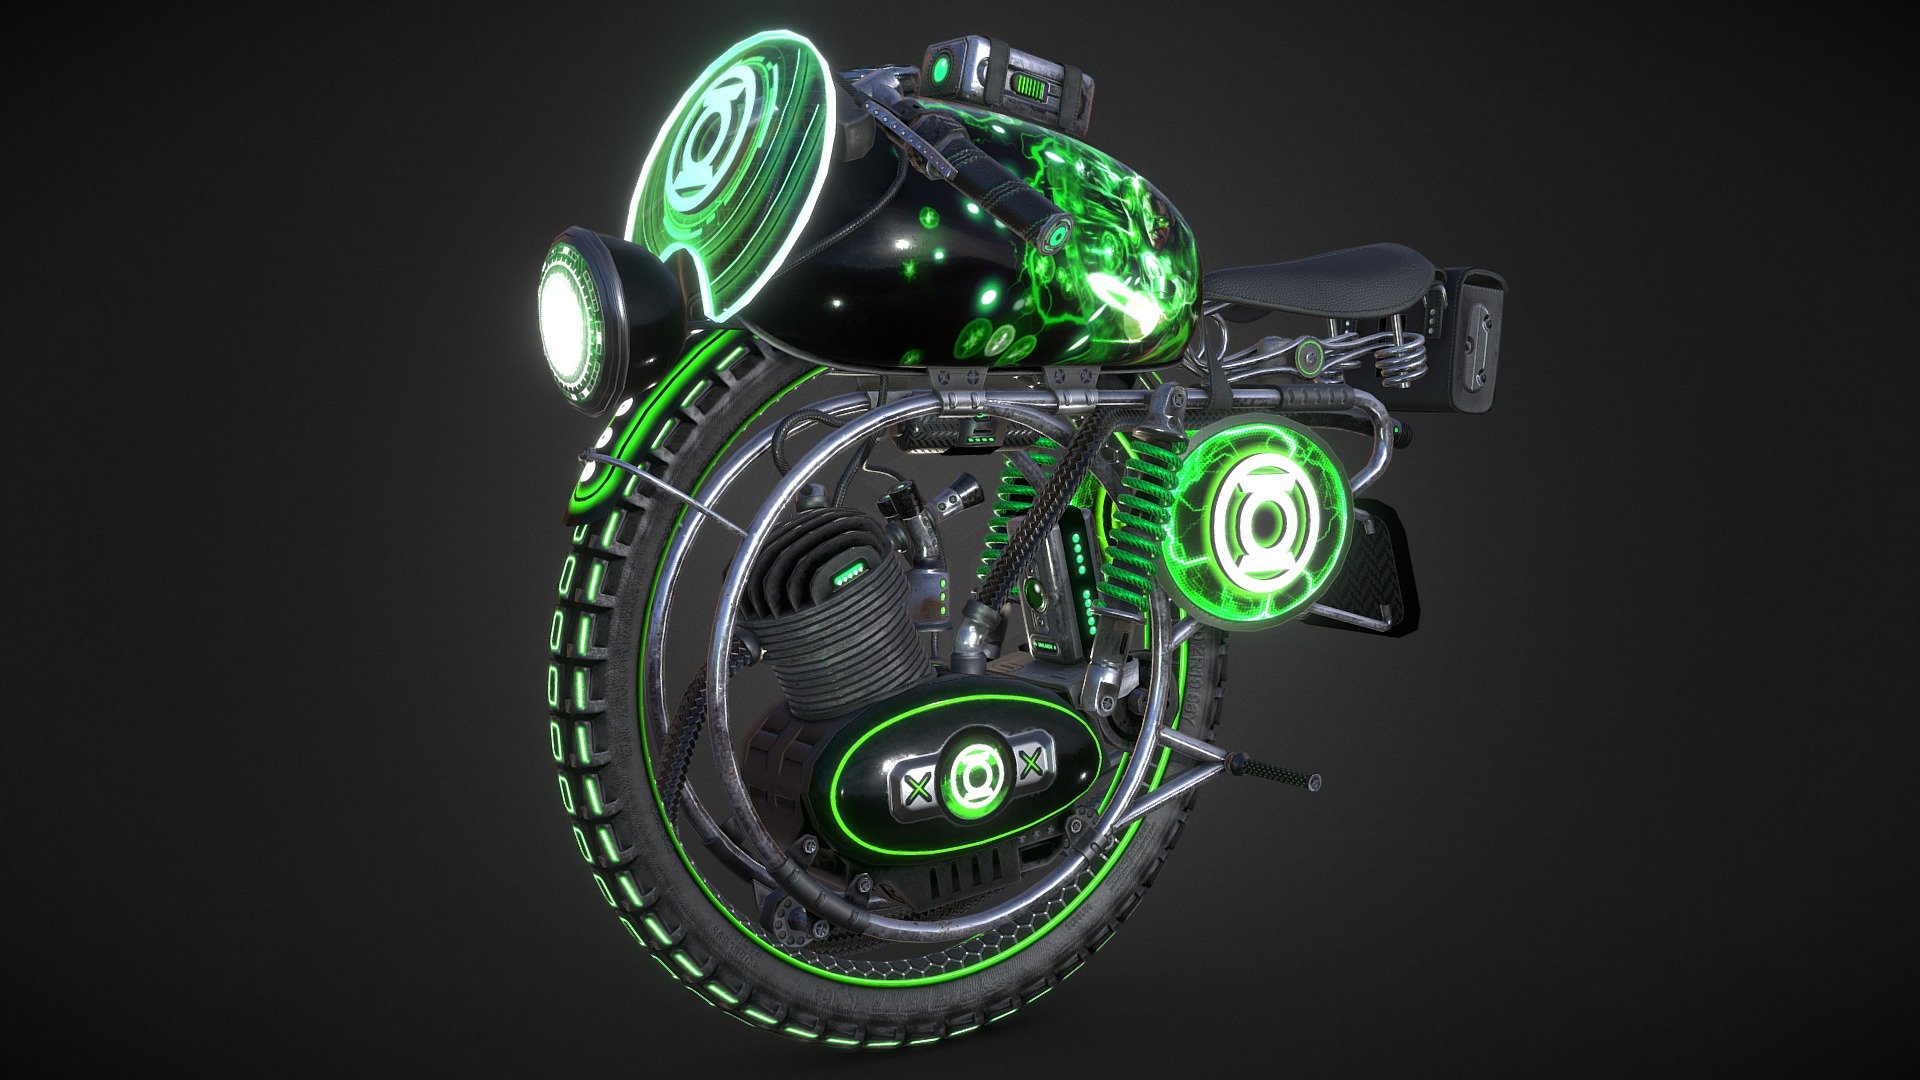 Here is my participation in the Texturing Challenge, I wanted to be original by making the green lantern bike, staying on black and neon green colors. I tried to put as many details as possible to have a realistic model. Hope you will like this textured model.

&gt; Willpower is the greatest energy there is in the universe.

&mdash;Xbp28&mdash;



Based on Monobike (UV Fix) by Warkarma, Monobike by romullus, and Motowheel by Costr (Viverna), licensed under CC-Attribution 3d model